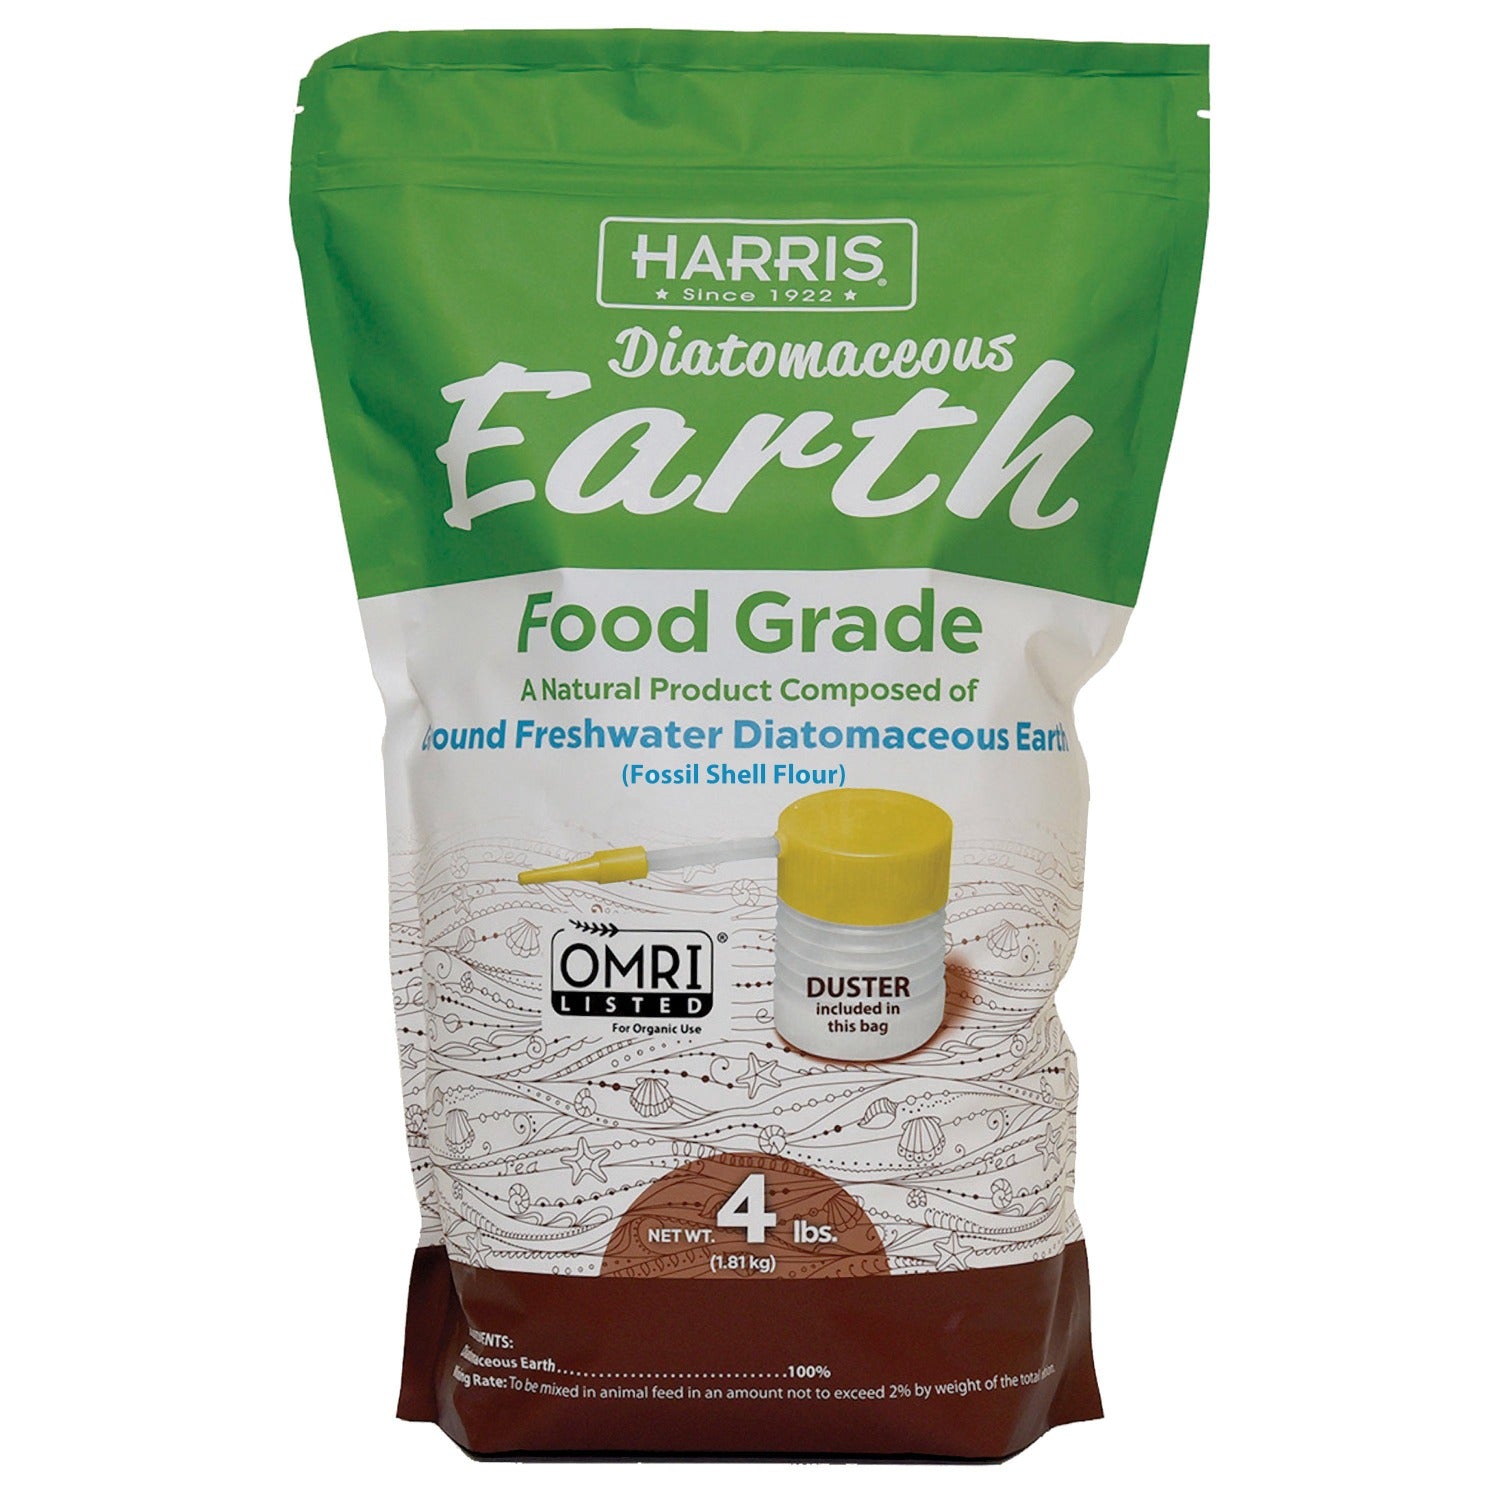 Harris Diatomaceous Earth Food Grade, 4lb with Powder Duster